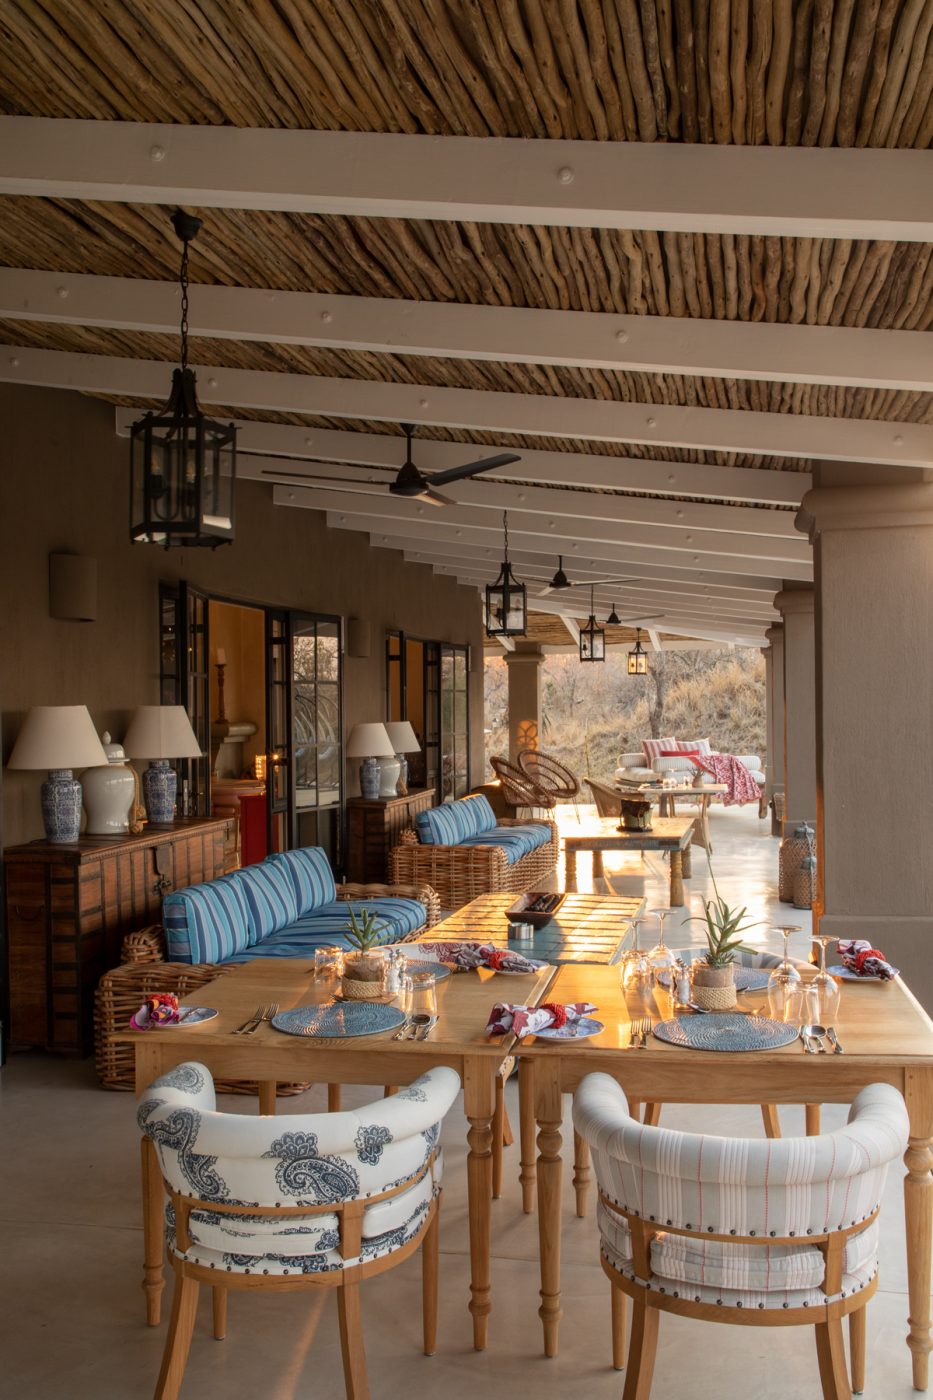 updated interiors at the Farmstead at Royal Malewane, within South Africa's Thornybush Private Game Reserve